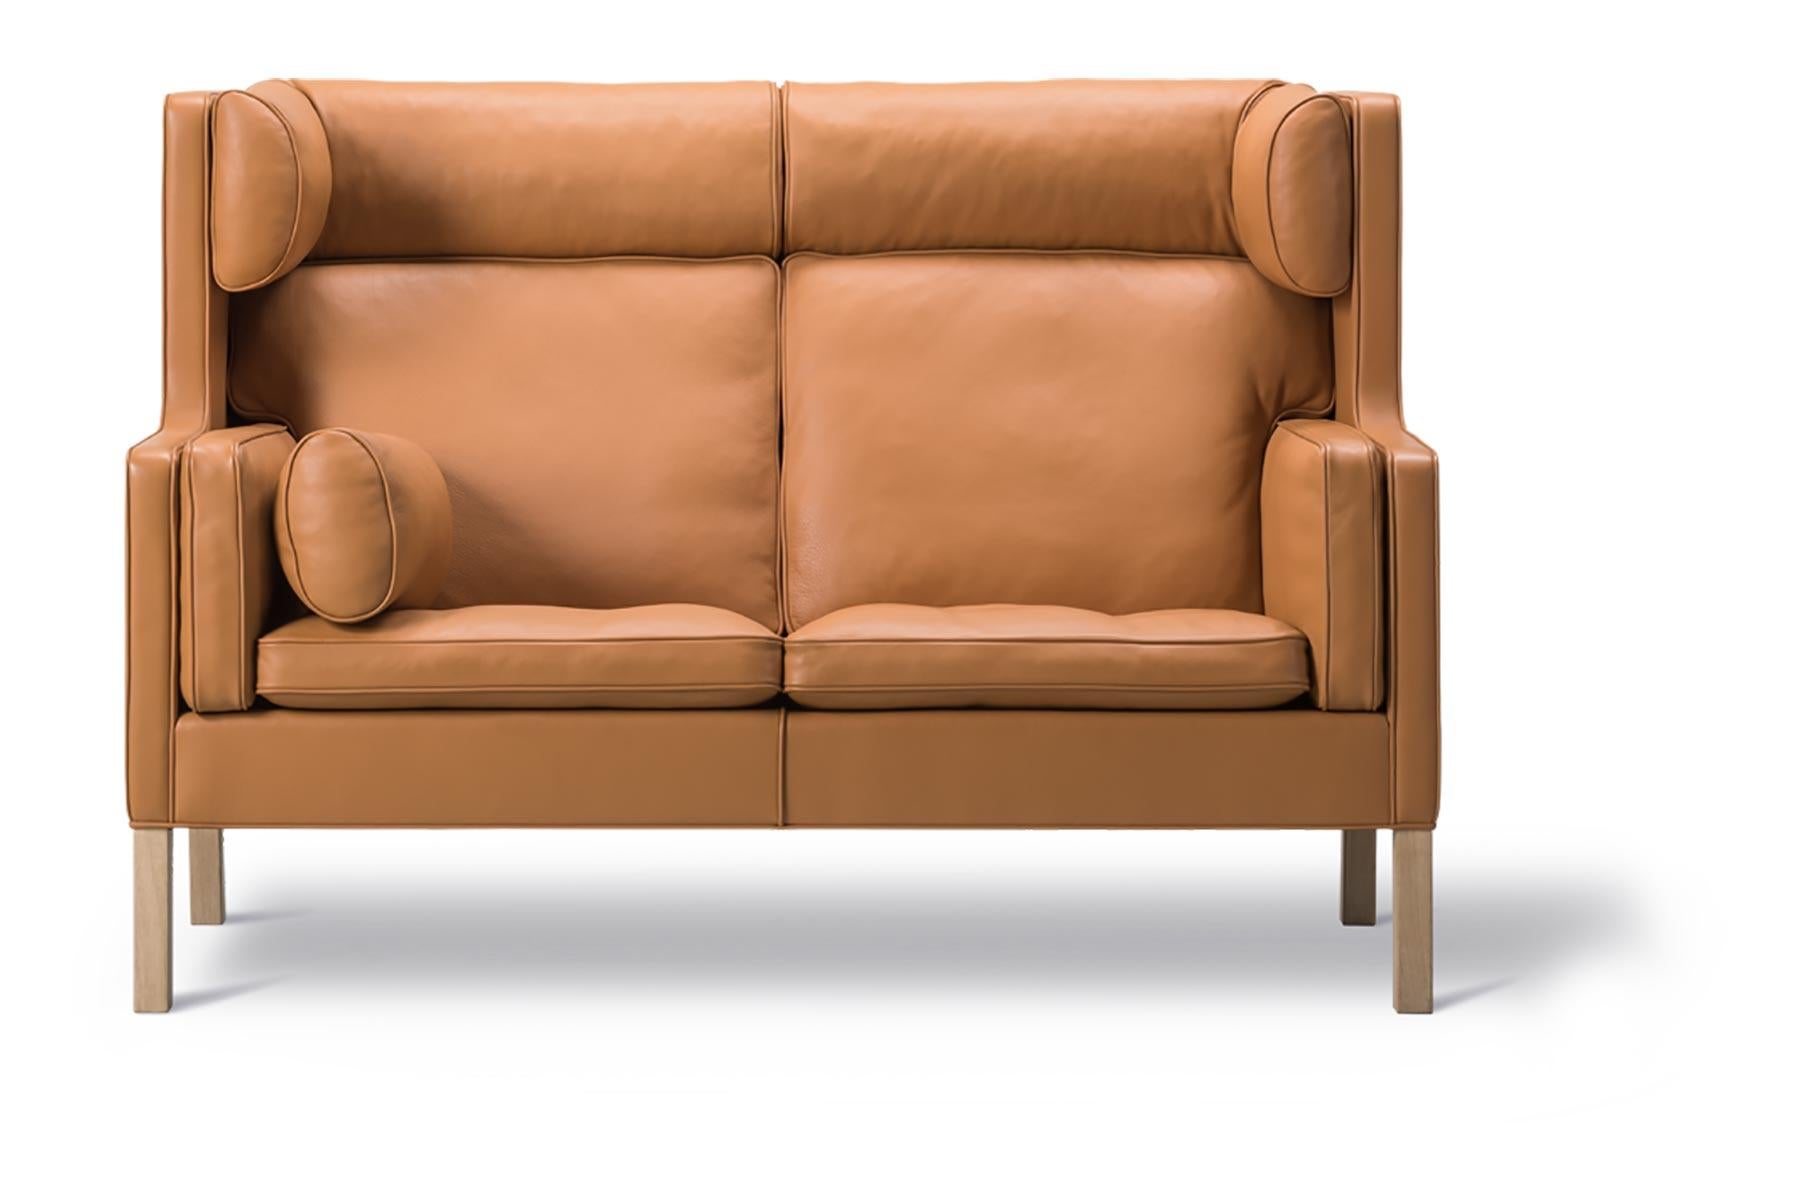 Designed in 1971, The Coupé sofa has a high enveloping back with wings, providing a calm retreat in larger spaces or a cosy setting in front of a fireplace.